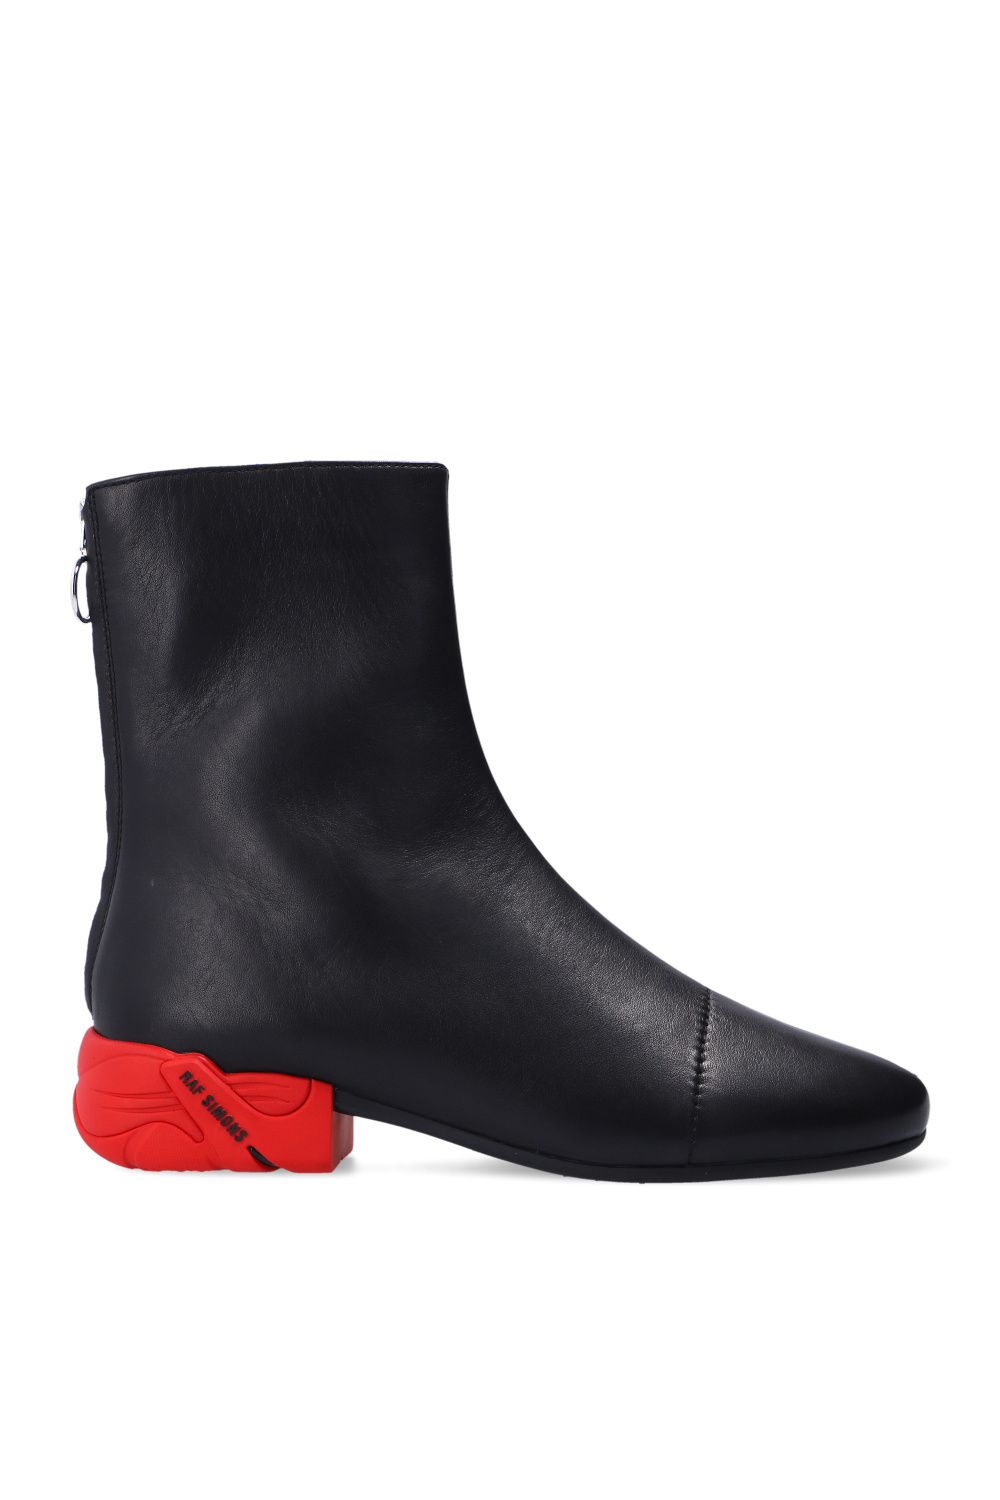 Raf Simons ‘Solaris-High’ leather ankle boots